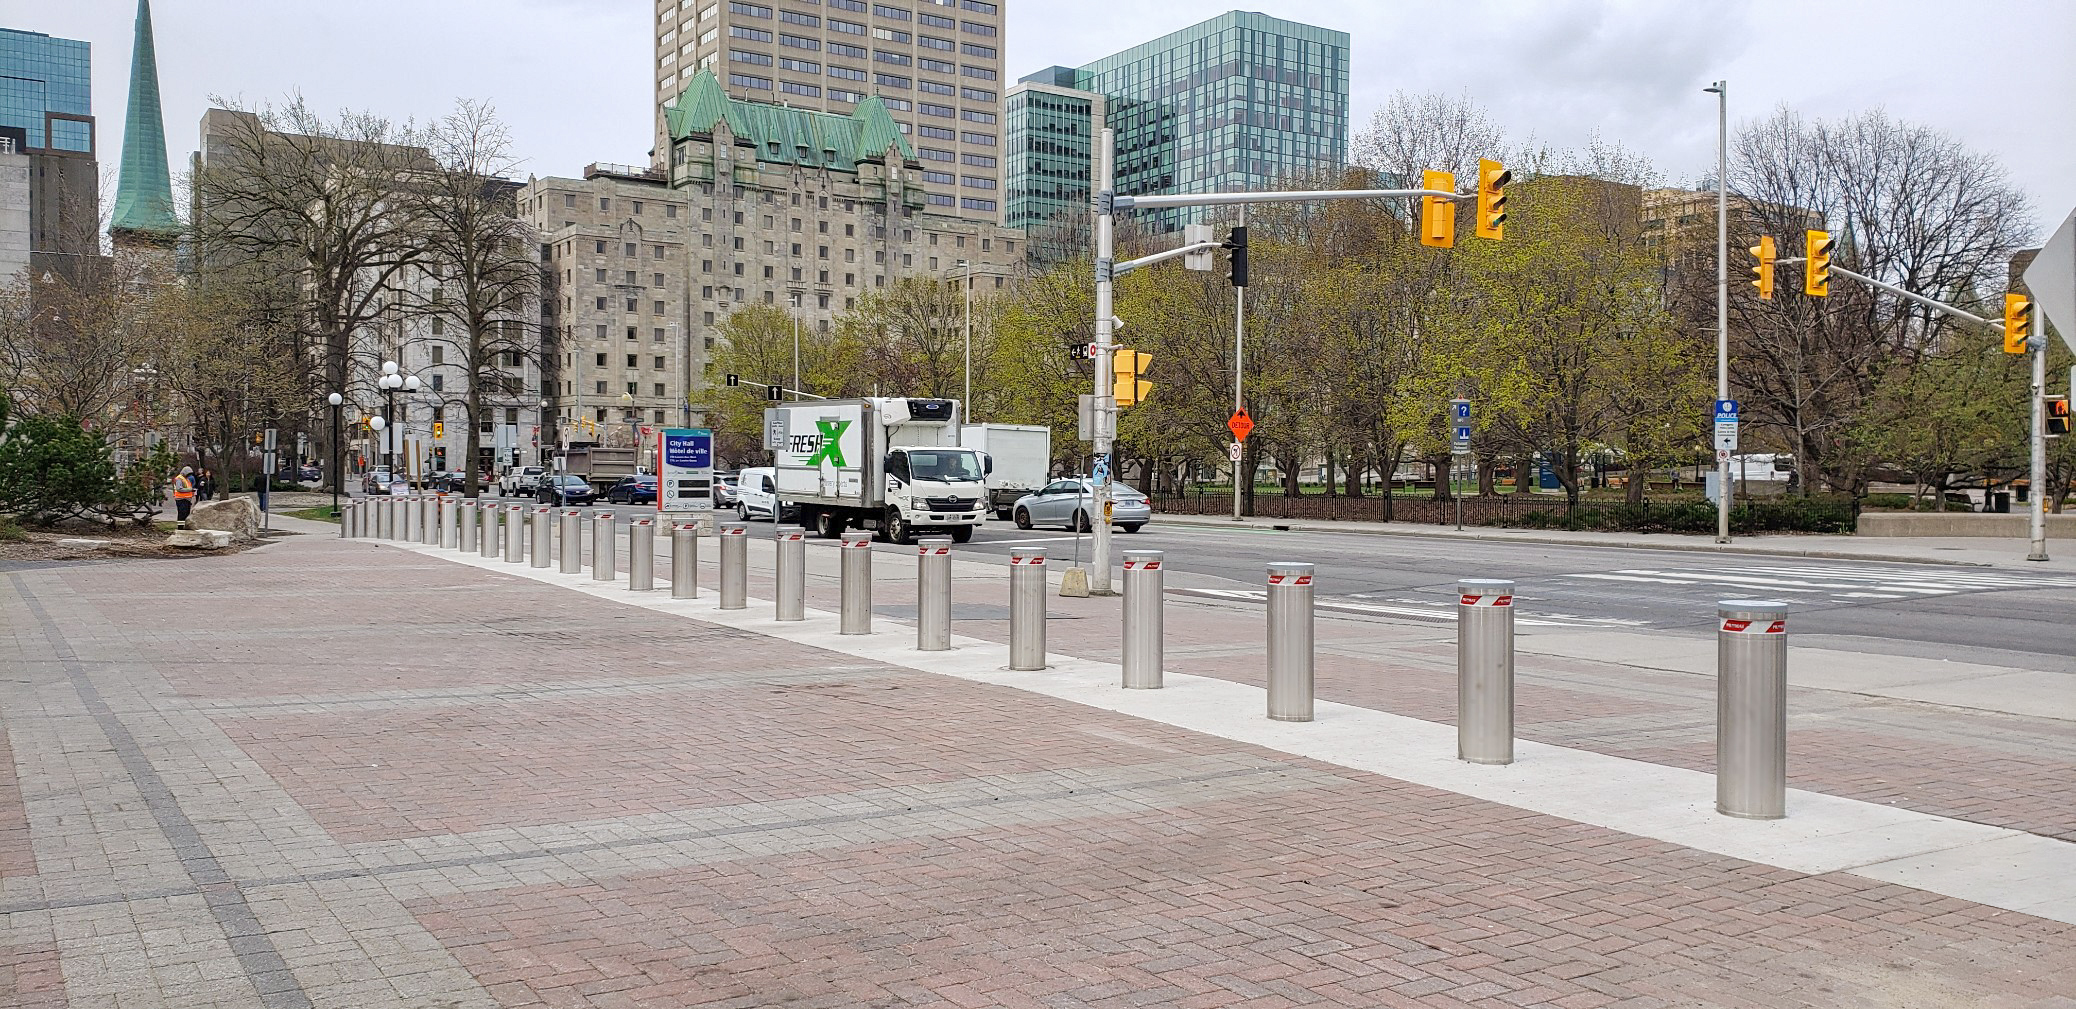 Image of fixed bollards installed to protect a square from the road traffic